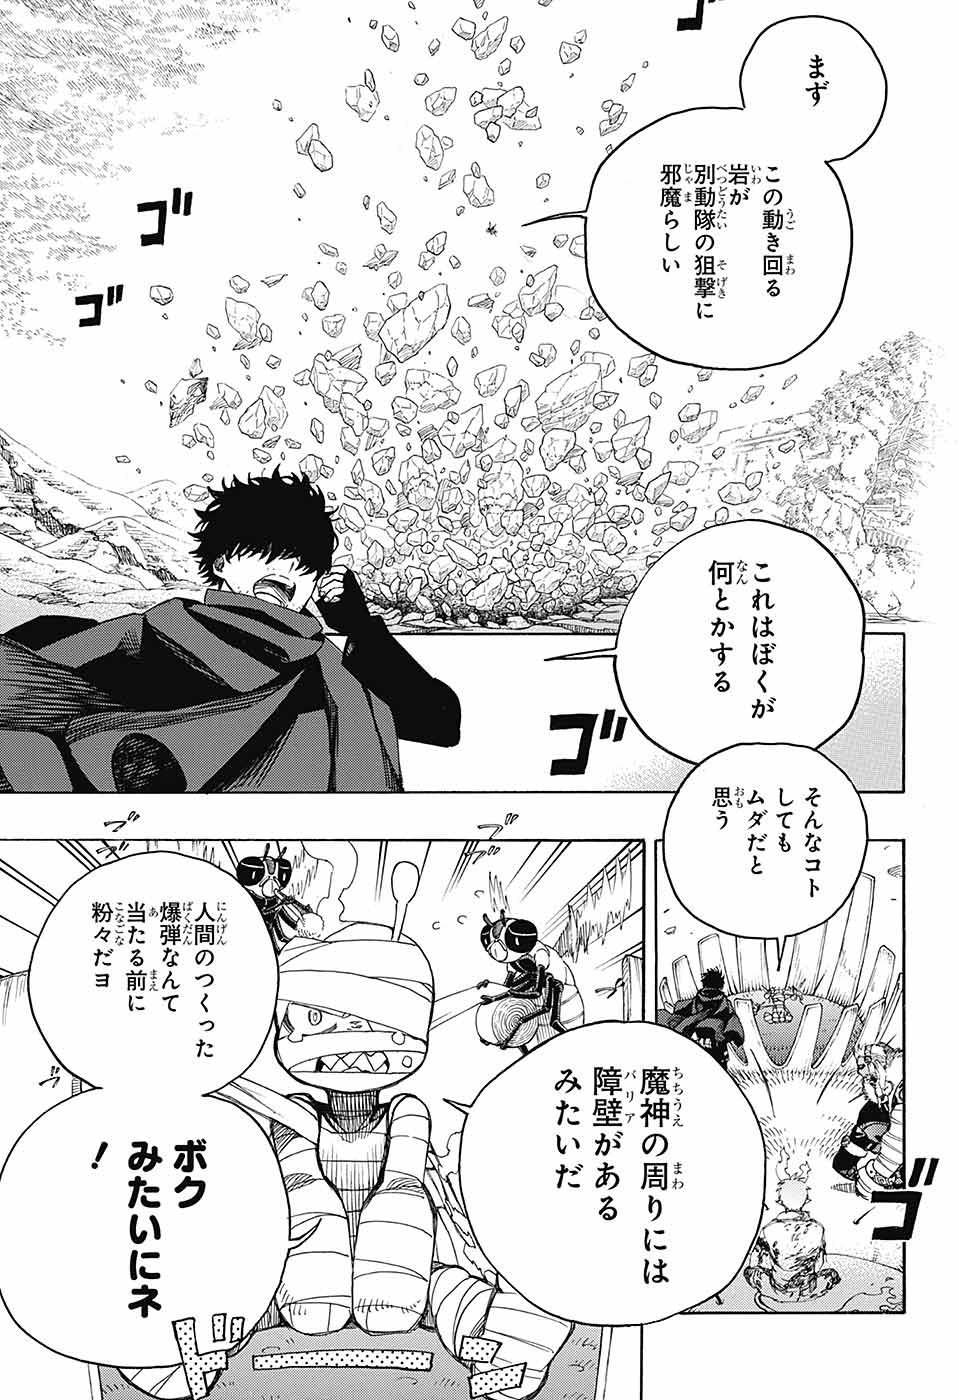 Ao no Exorcist - Chapter 136 - Page 8